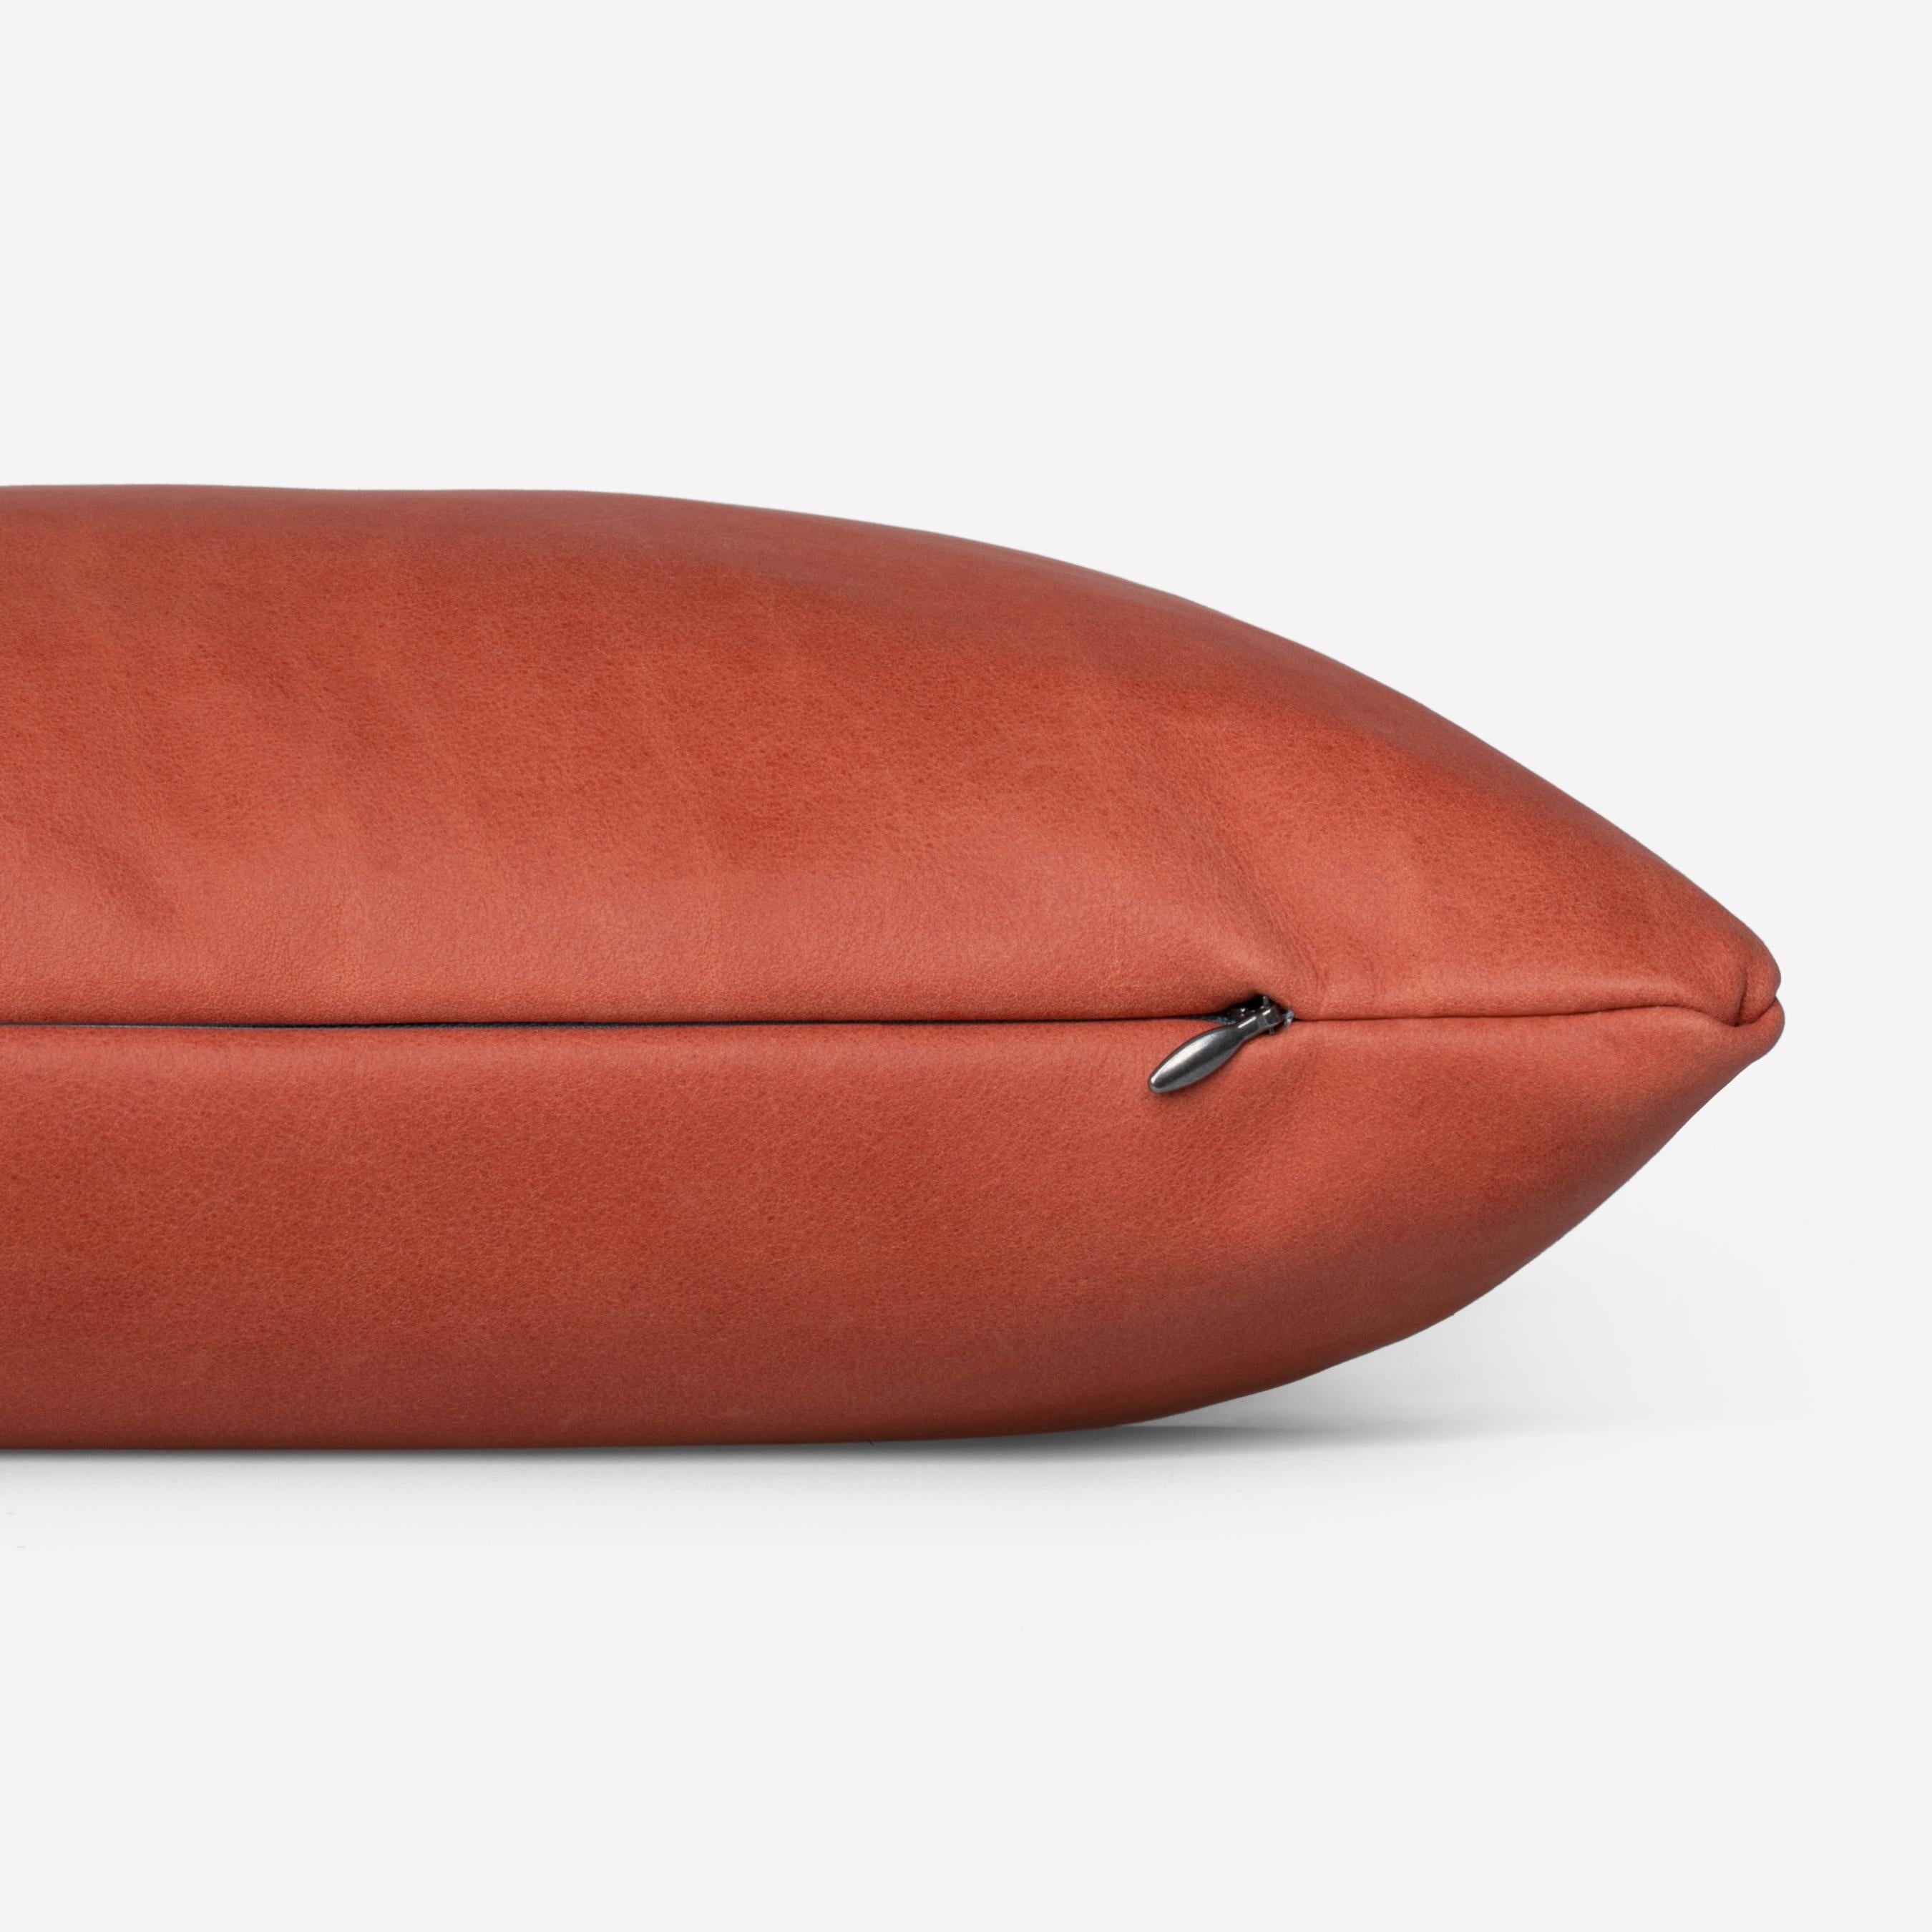 Maharam Pillow
Loam
001 Terracotta
 
Guided by the Maharam Design Studio’s material expertise, Loam celebrates the inherent beauty of leather returned to a more natural state. Sourced in Italy, Loam is a lightly sanded nubuck with a soft, matte